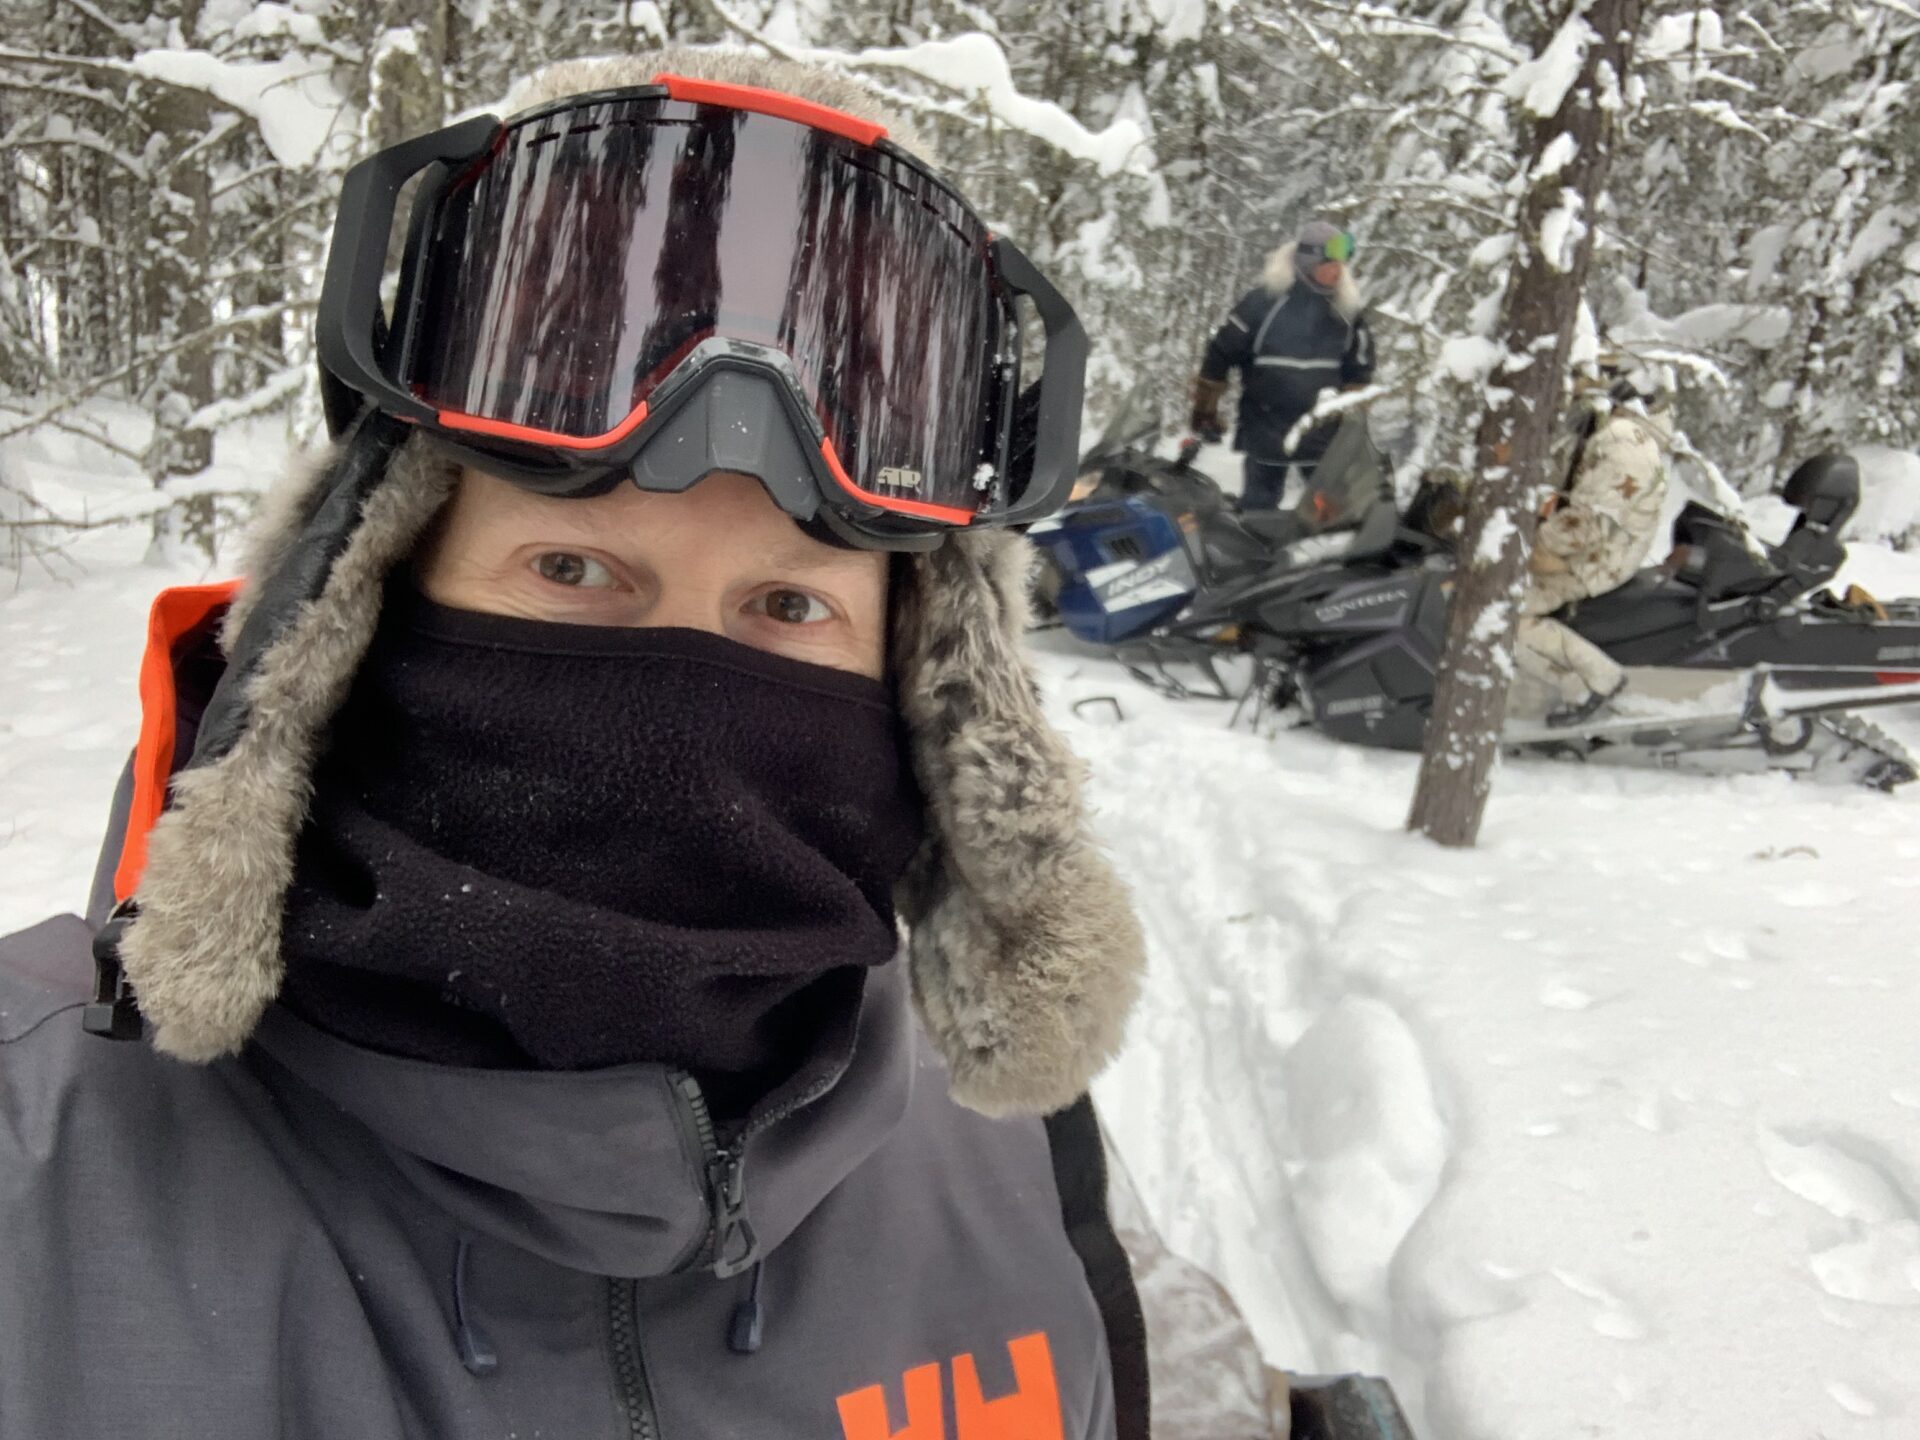 Jeff Newman taking a selfie during a break after driving a snowmobile in a heavily wooded and snowed forest